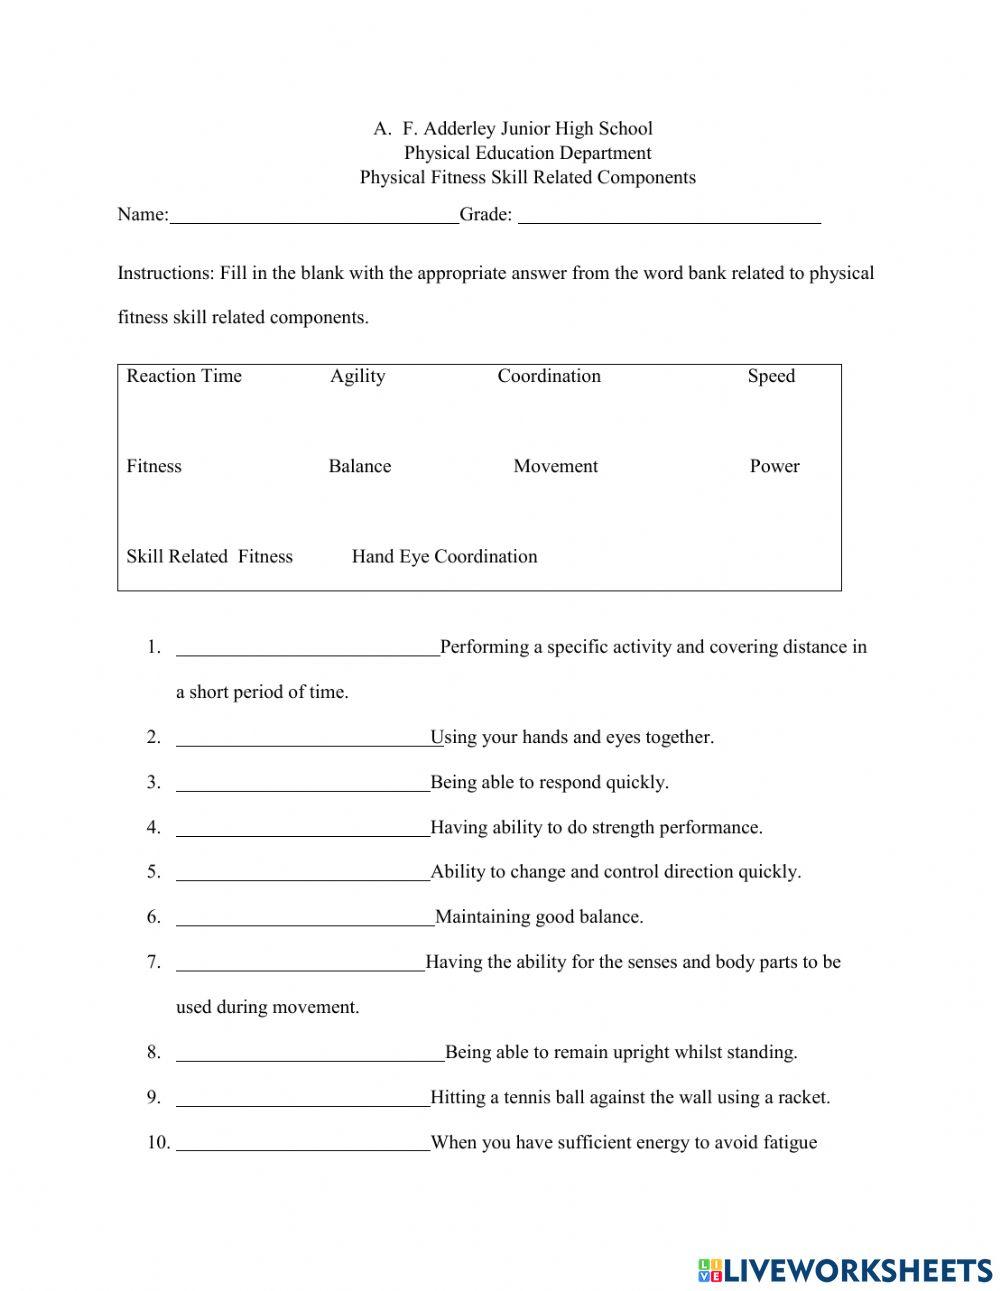 AFA Physical Fitness Skill Related Component Work Sheet